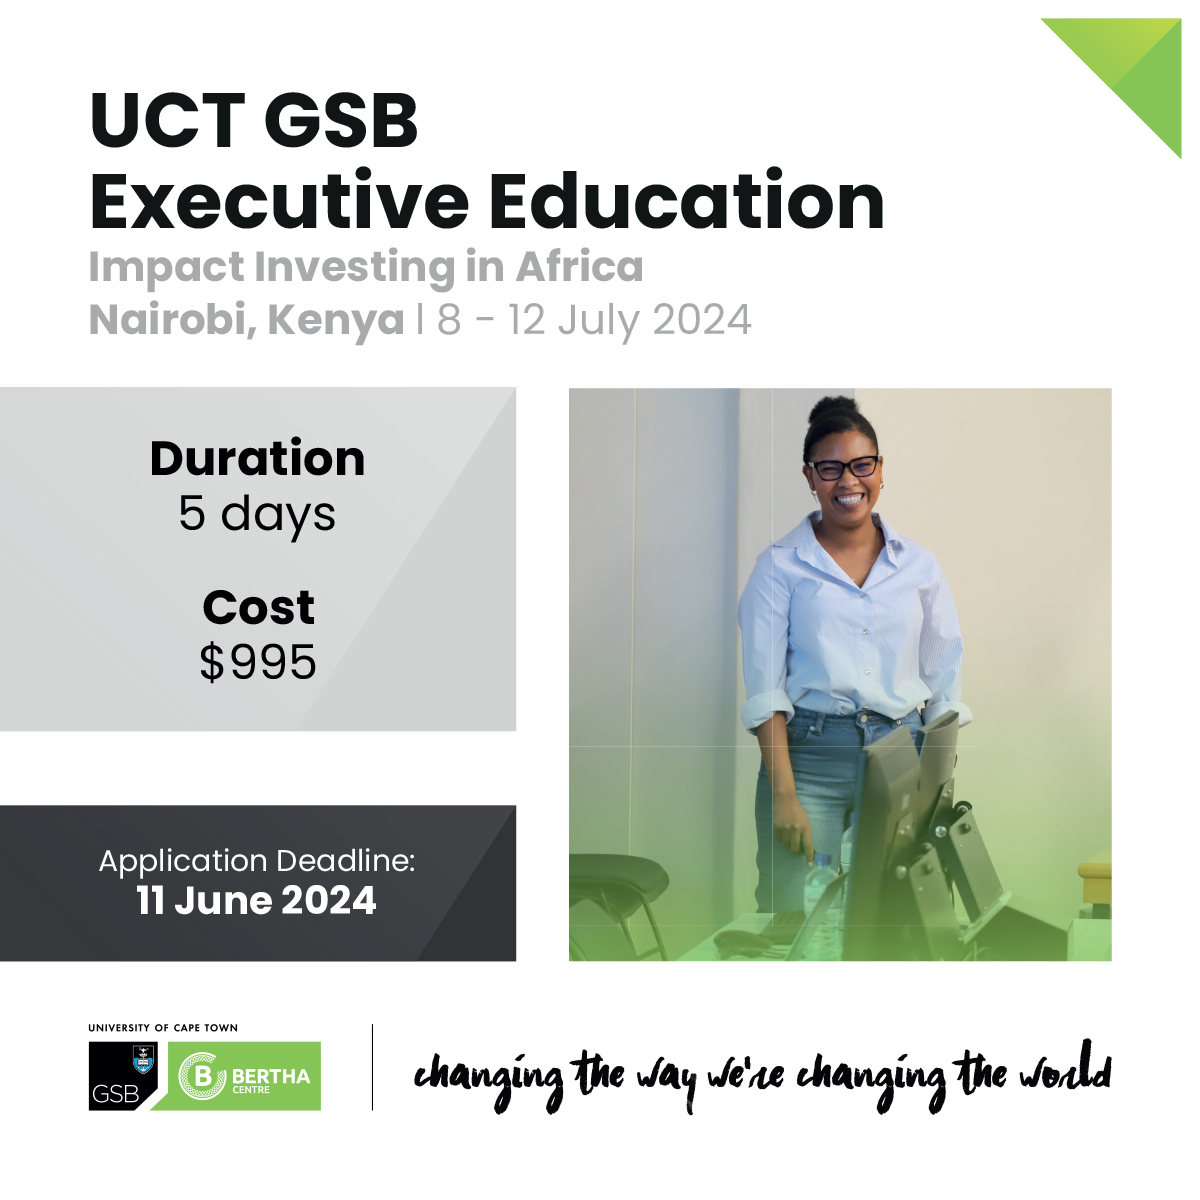 Registrations close on 11 June for our UCT GSB Executive Education course 'Impact Investing in Africa'. Read more and apply here: bit.ly/3T6VNLl #impactinvesting #innovativefinance #Kenya #EastAfrica